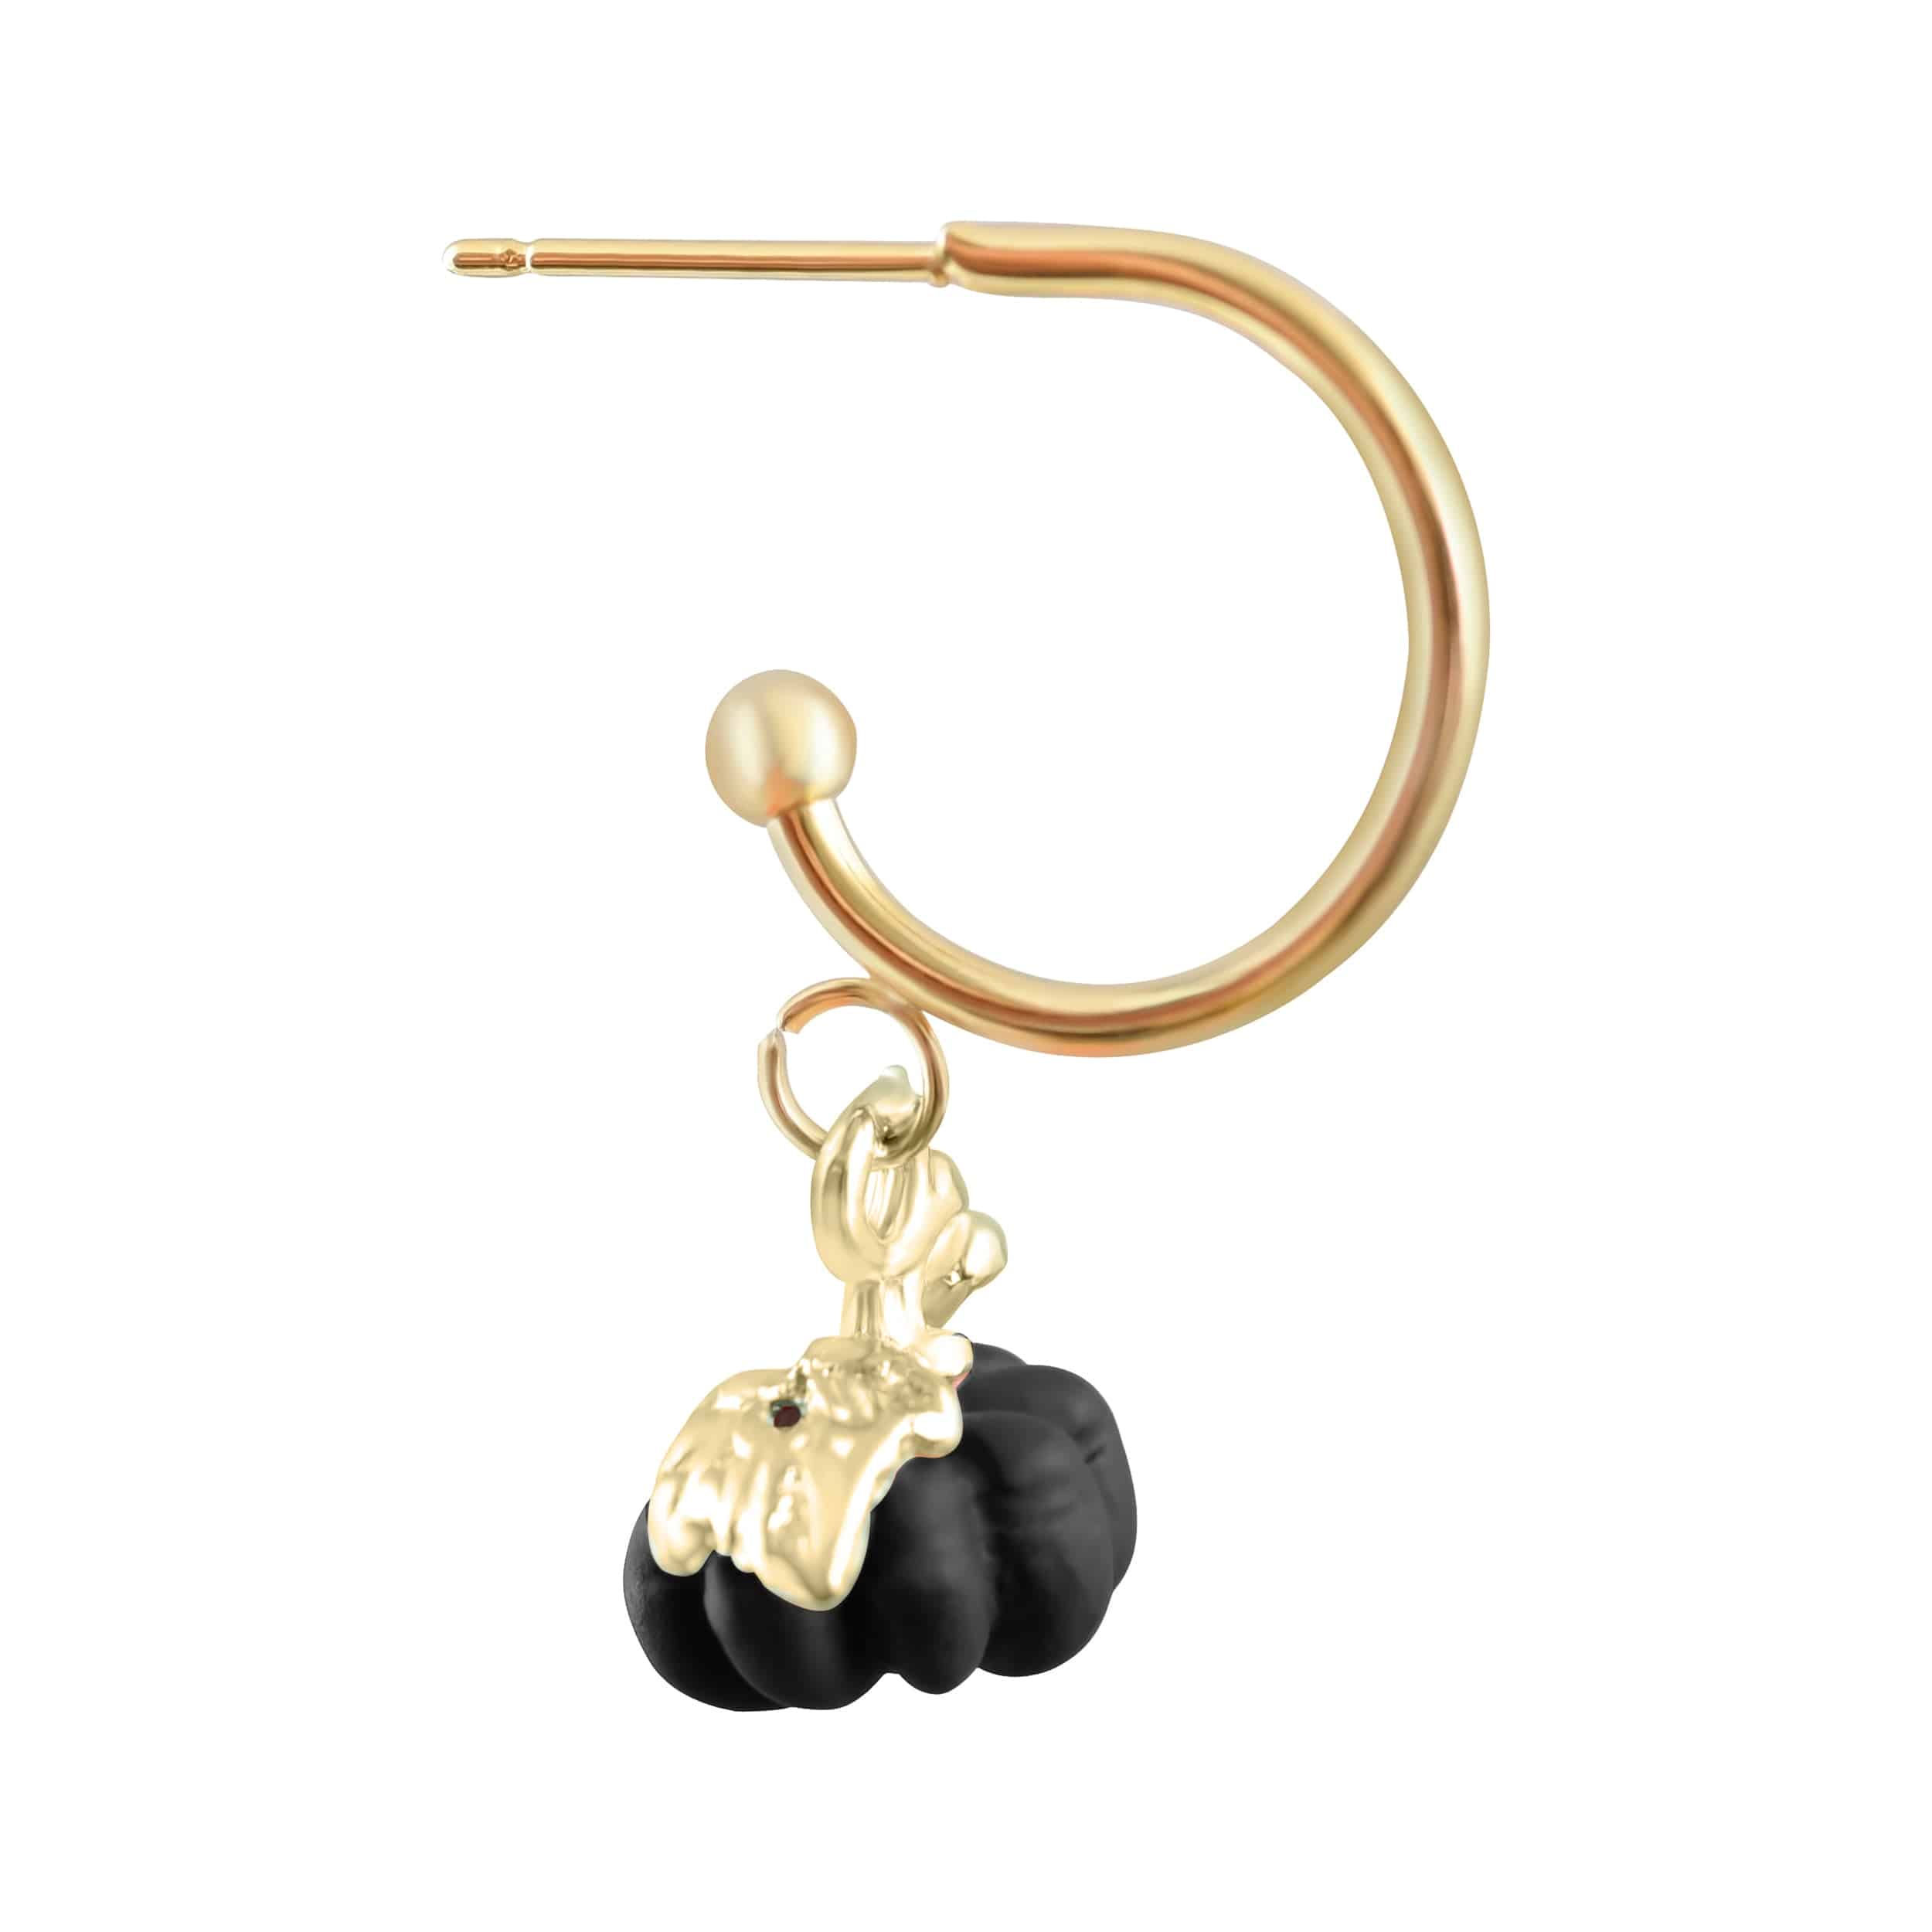 Dainty Pumpkin Earrings - The Gilded Witch